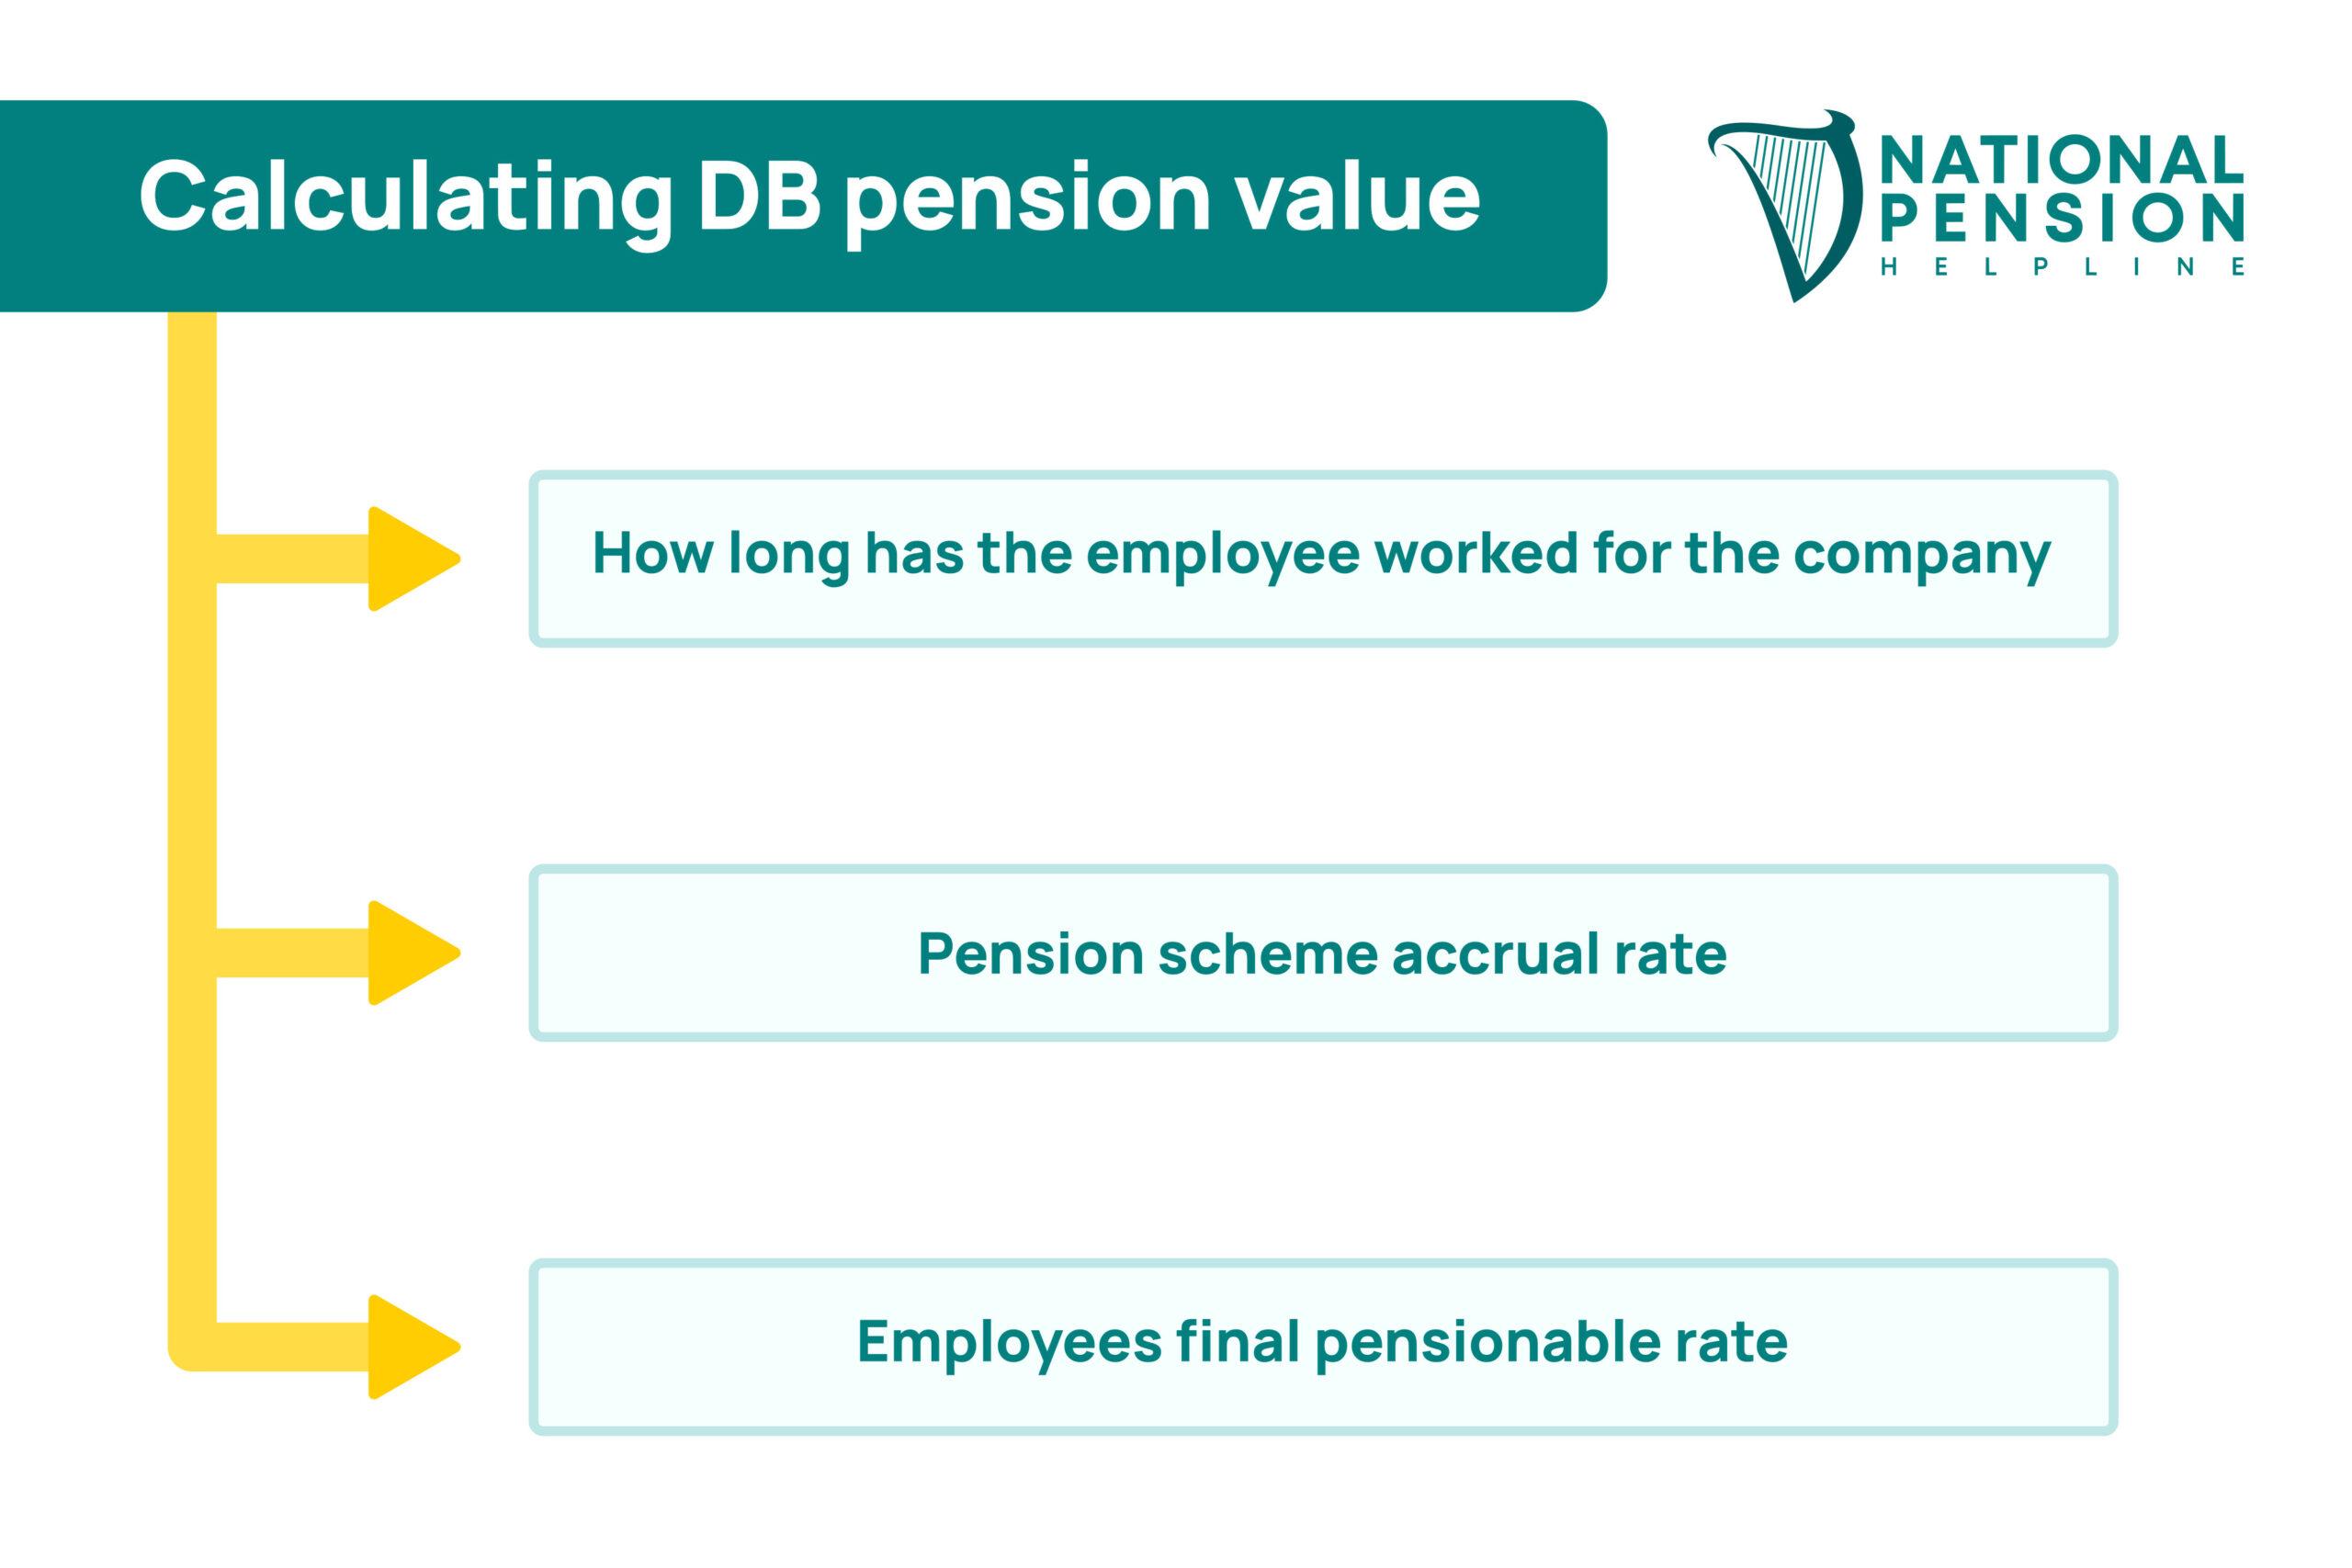 How to calculate a defined benefit pension